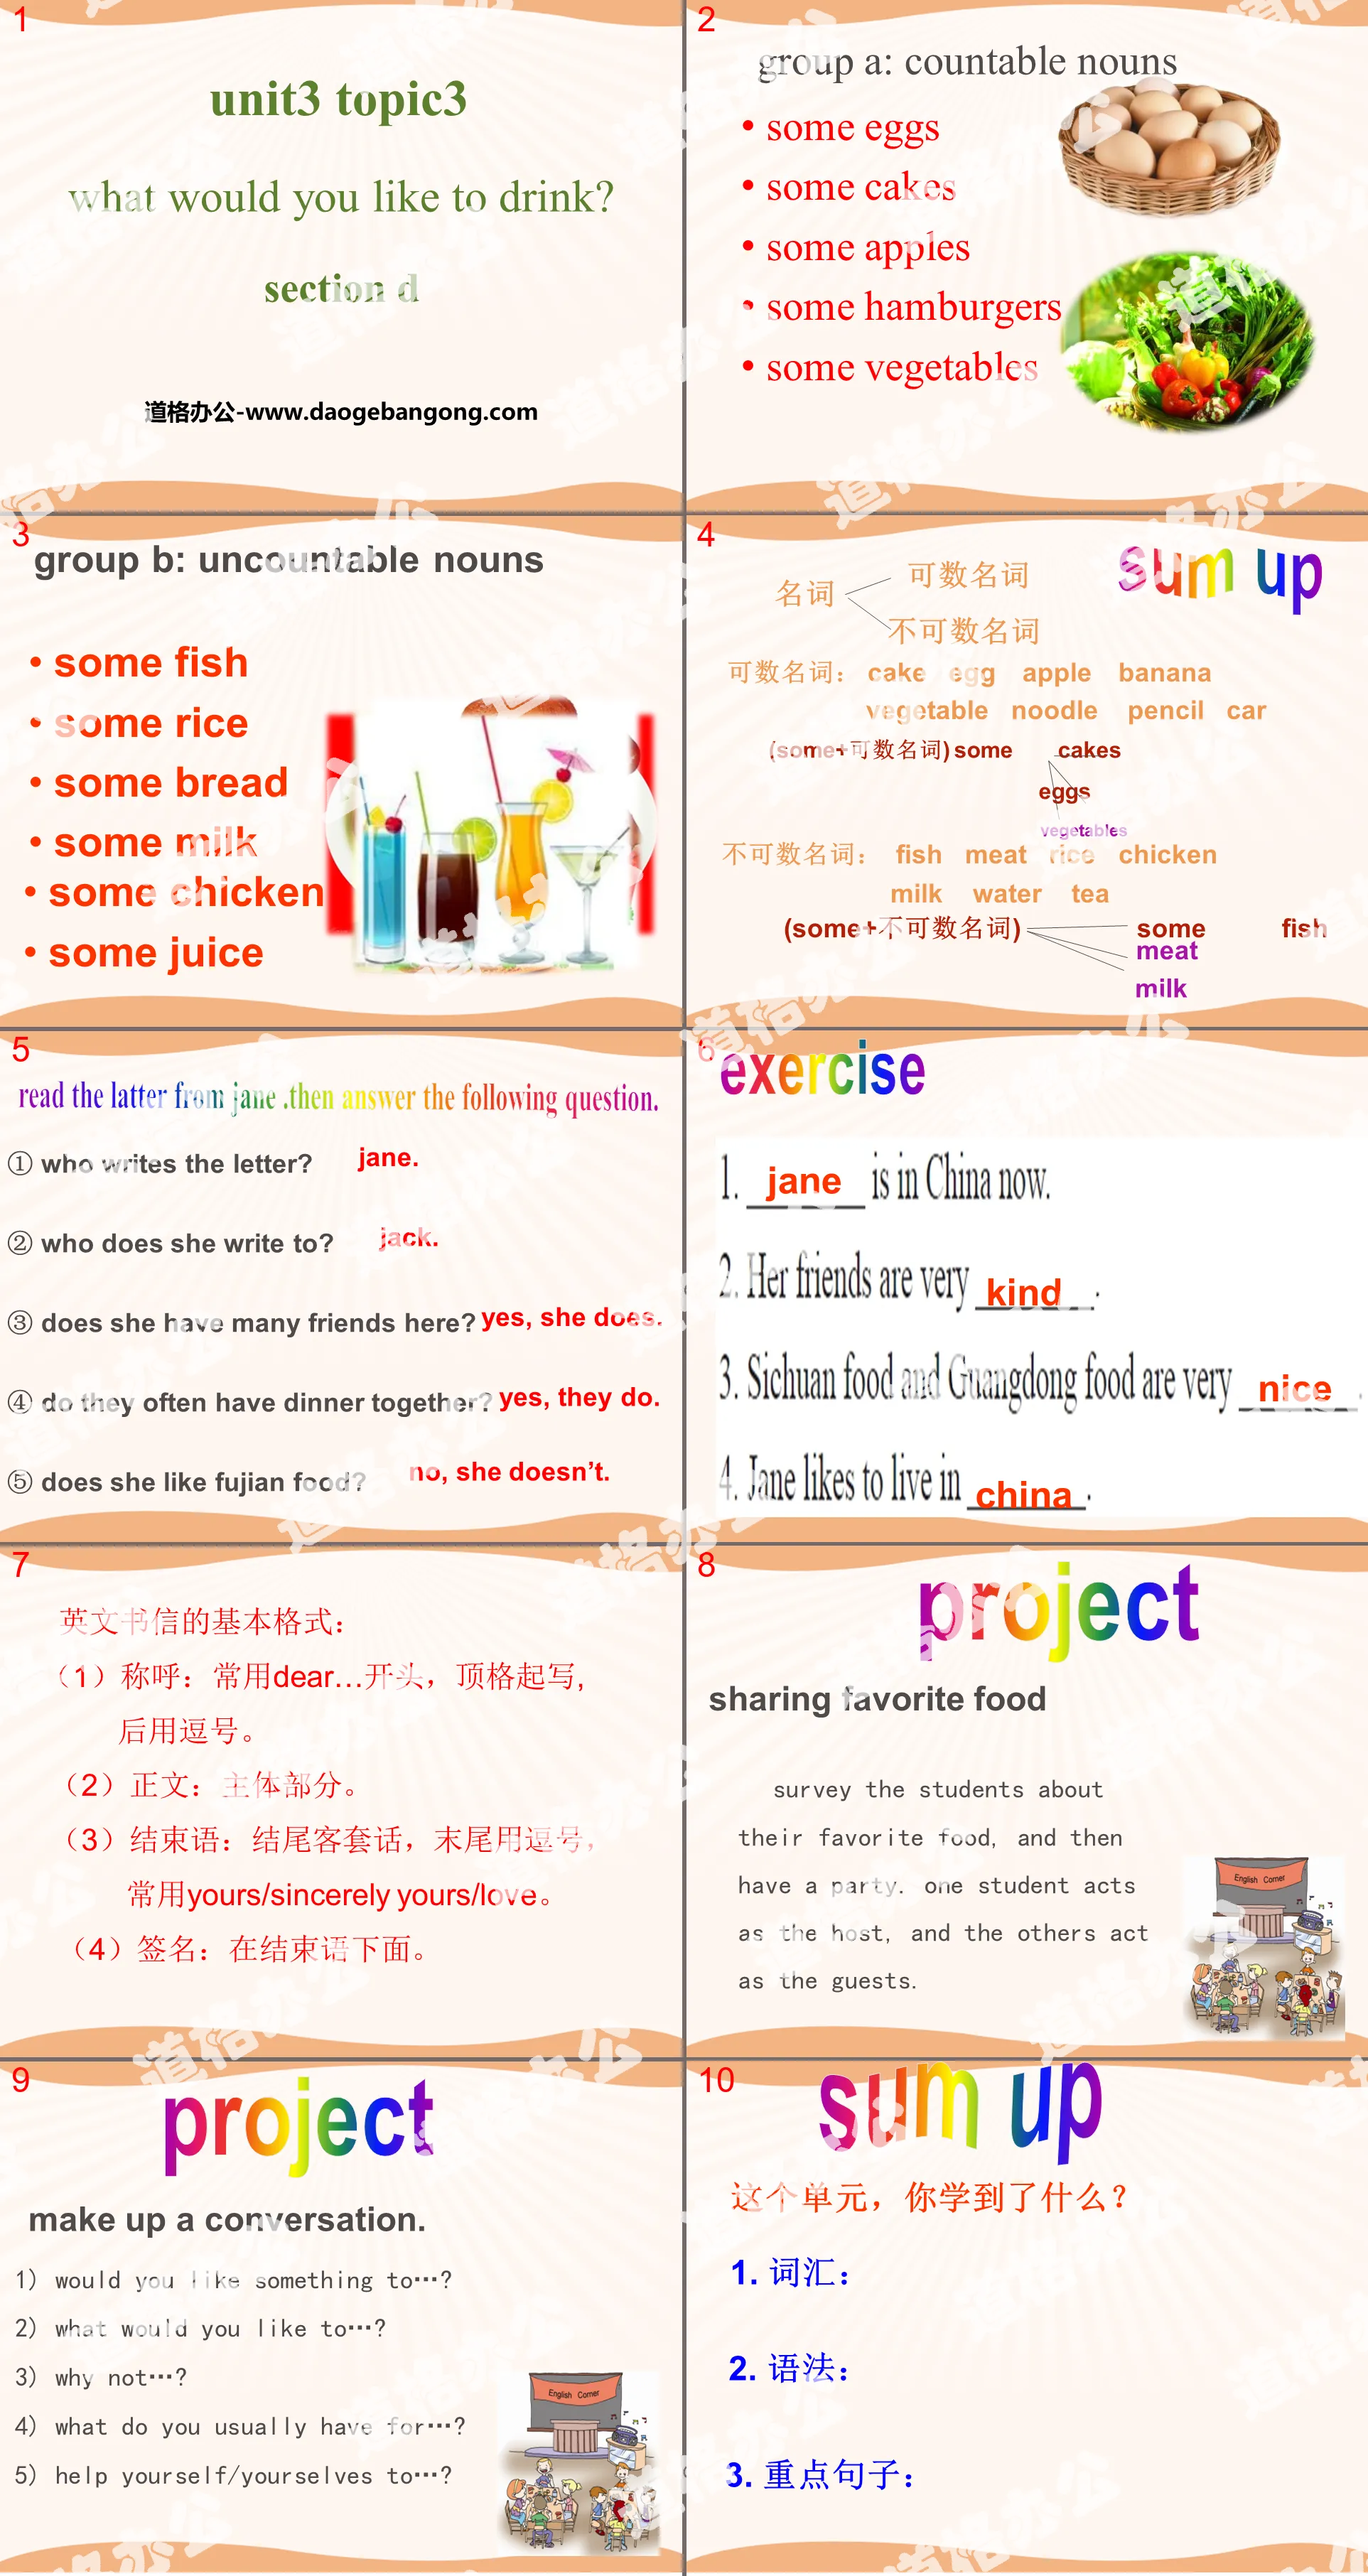 《What would you like to drink?》SectionD PPT
